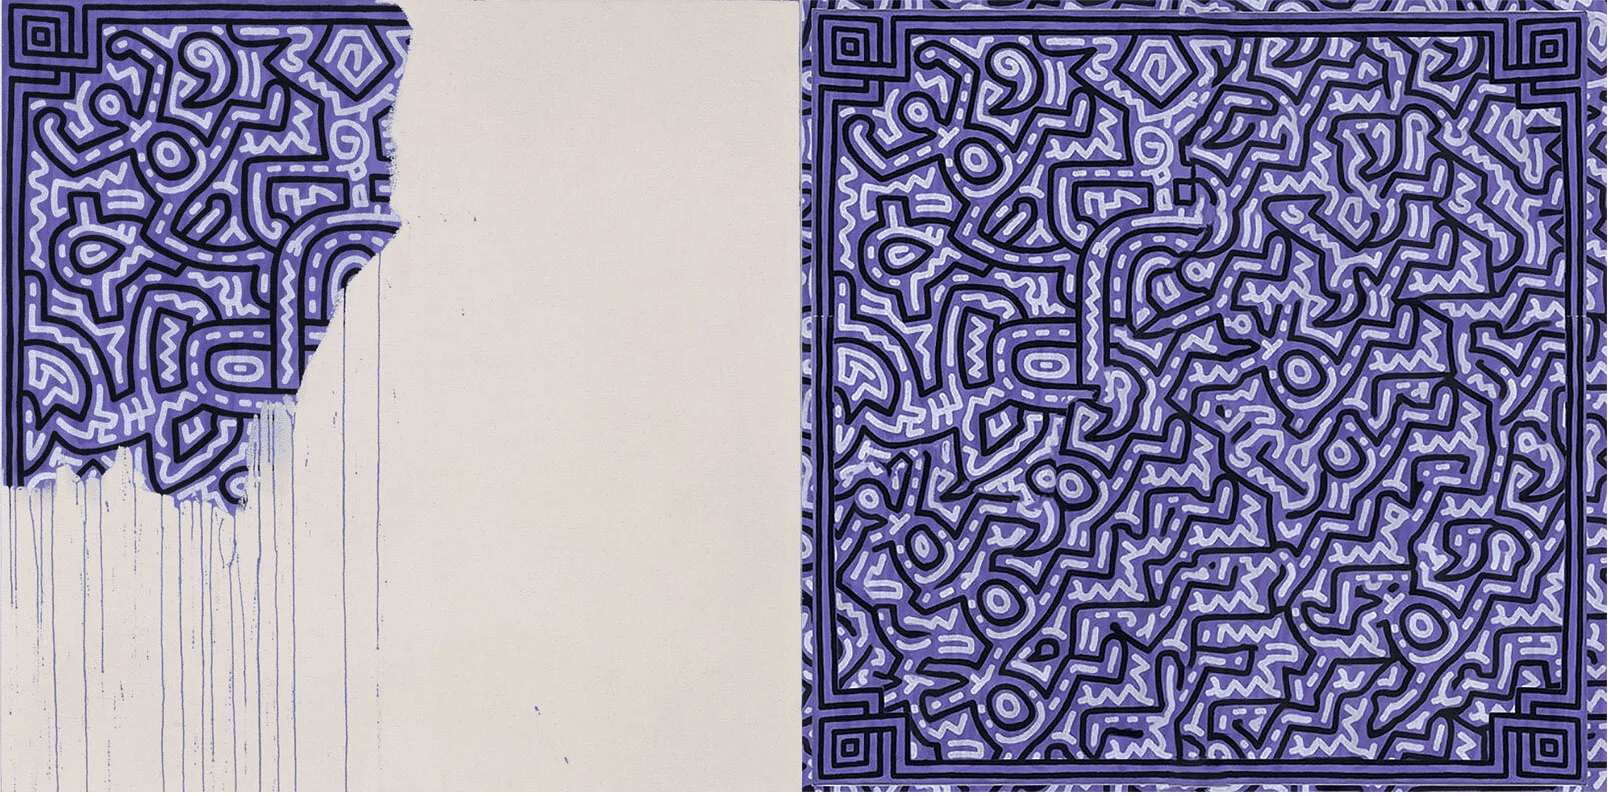 AI completes Keith Haring painting